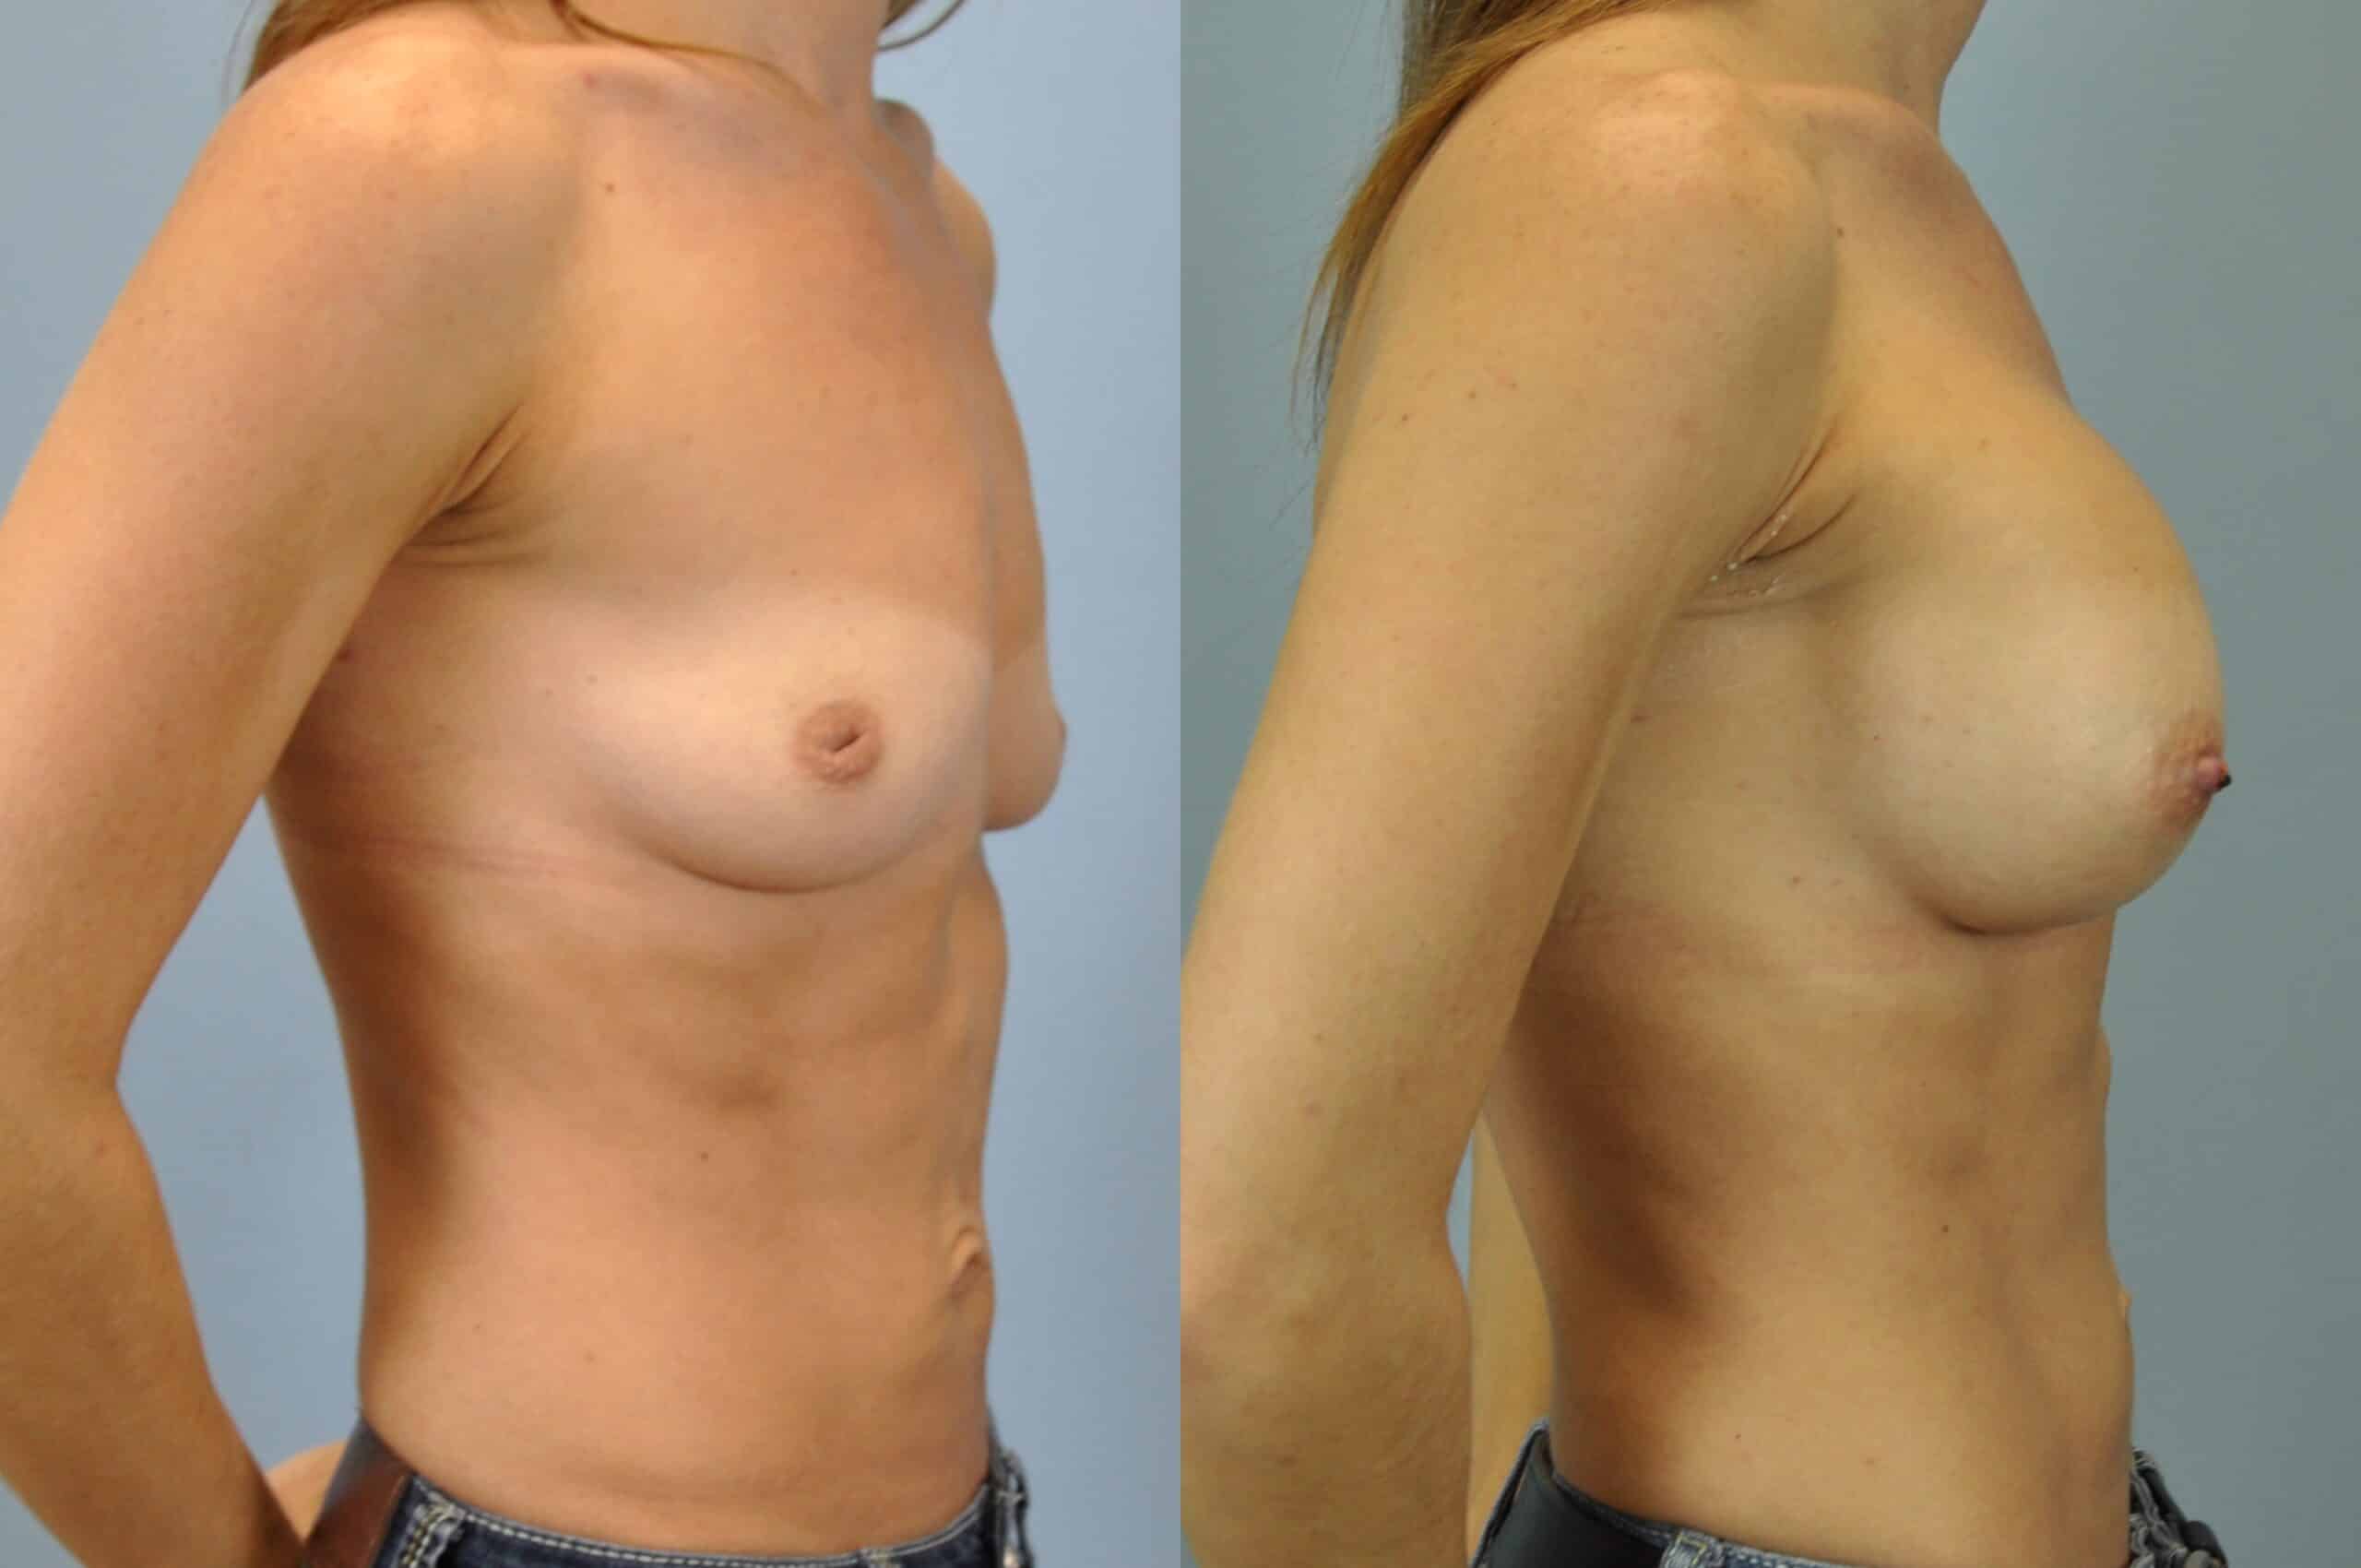 Before and after, Patient 1 mo post op from Breast Augmentation, Inverted Nipple Repair, Papuloplasty procedures performed by Dr. Paul Vanek